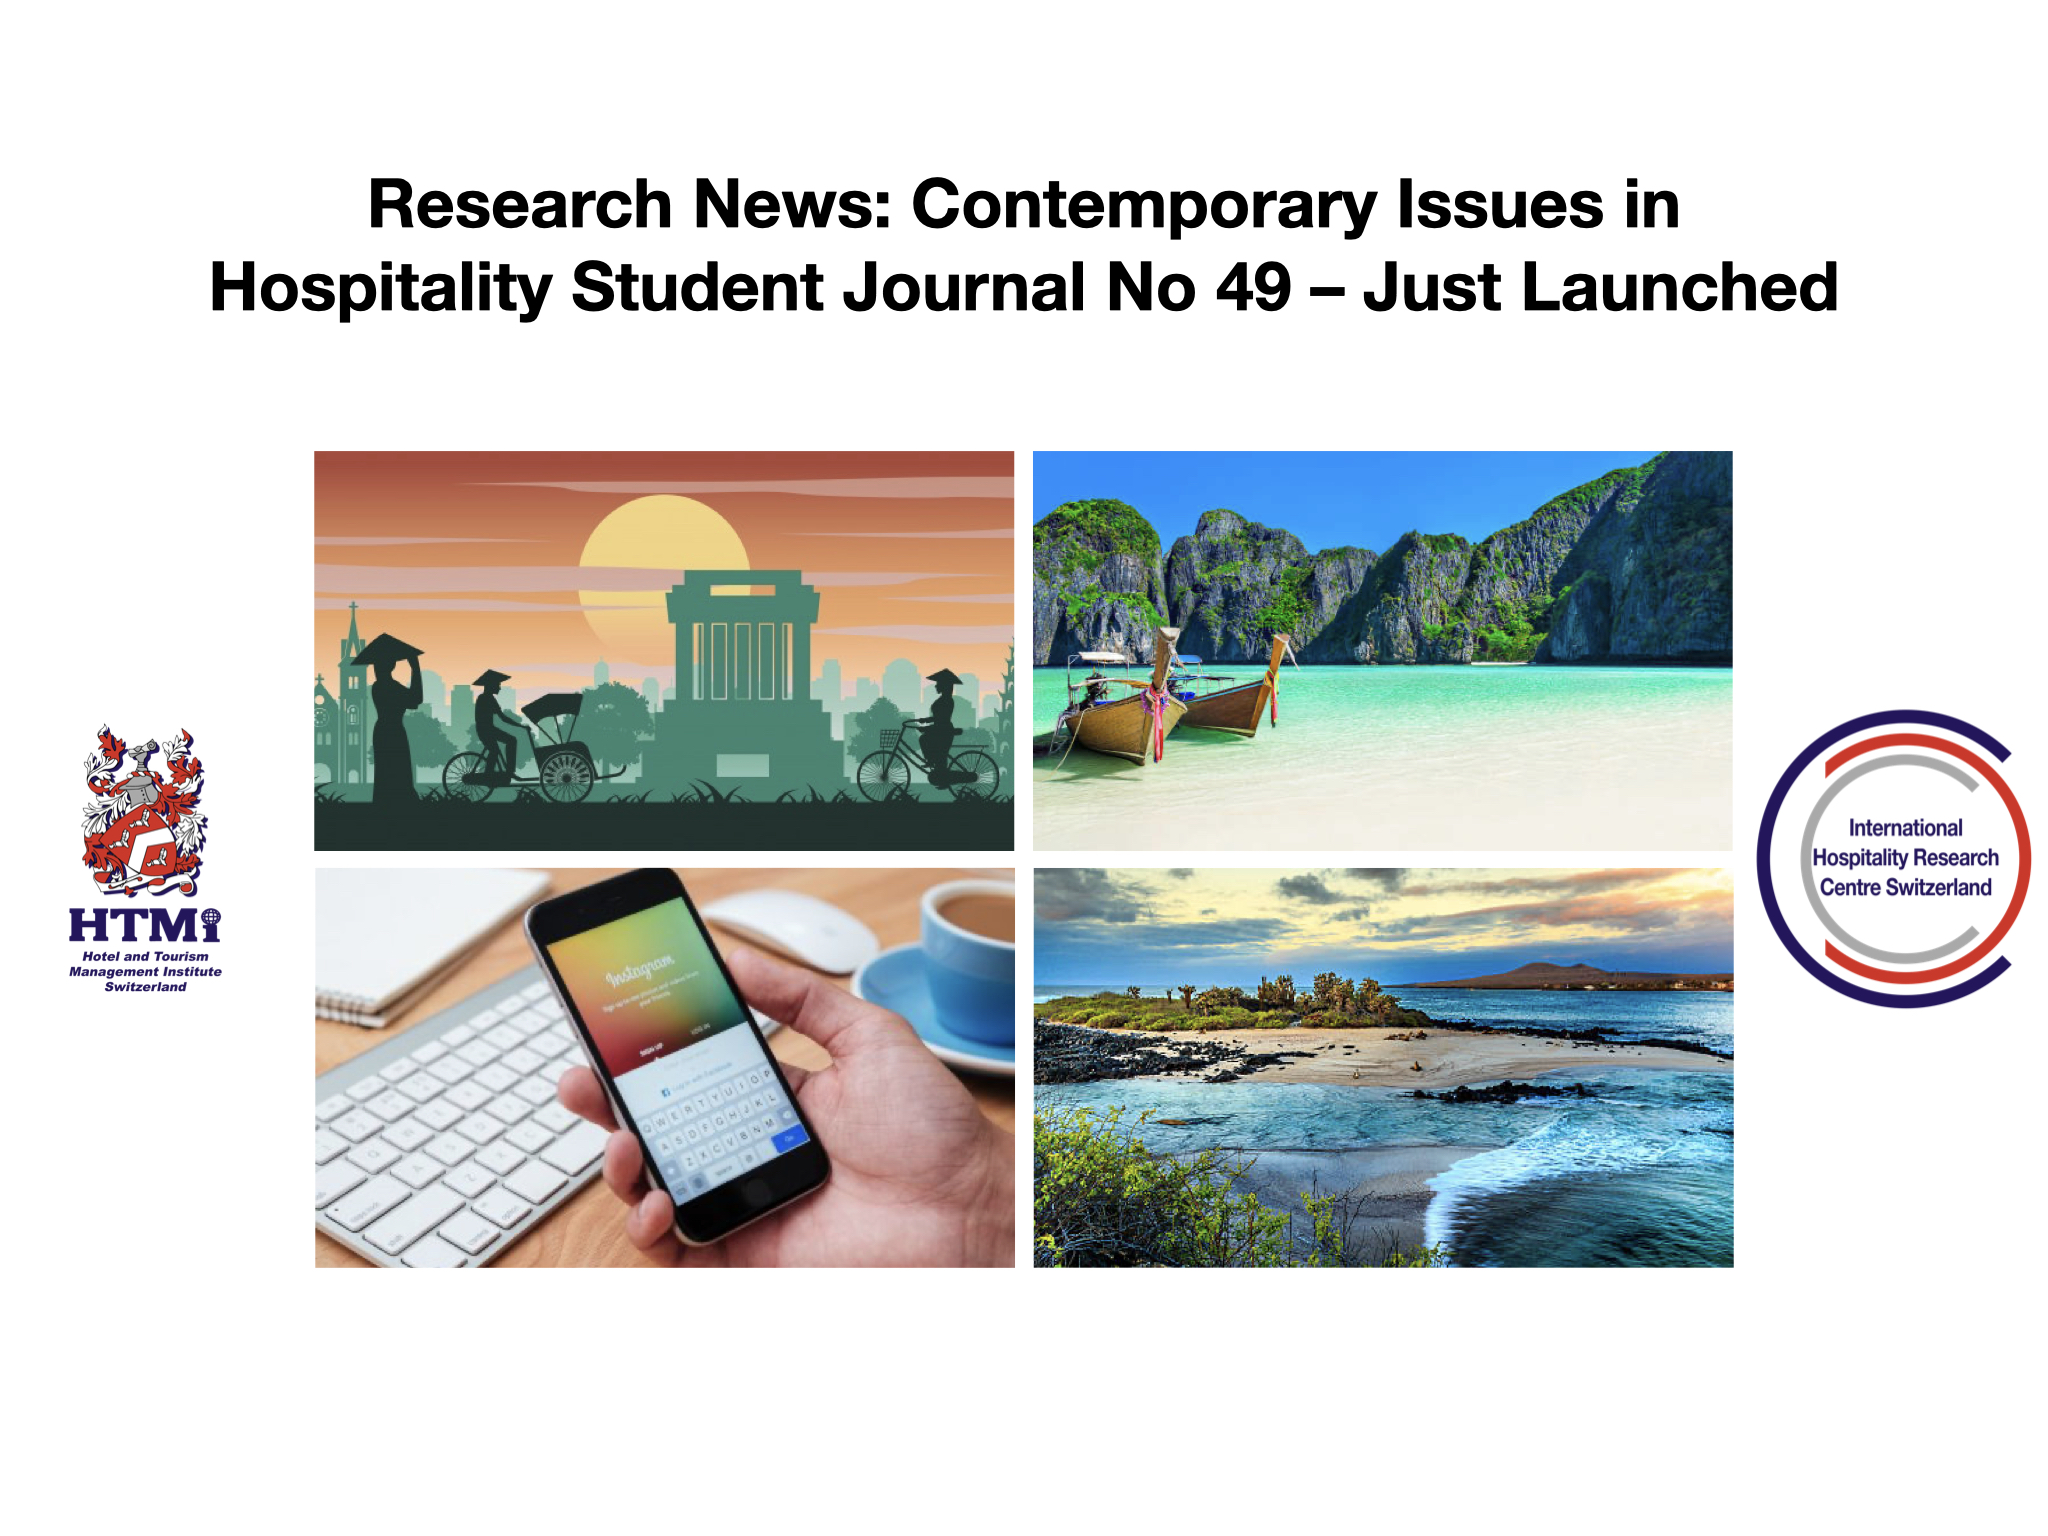 Research News: Contemporary Issues in Hospitality Student Journal No 49 HTMi Switzerland